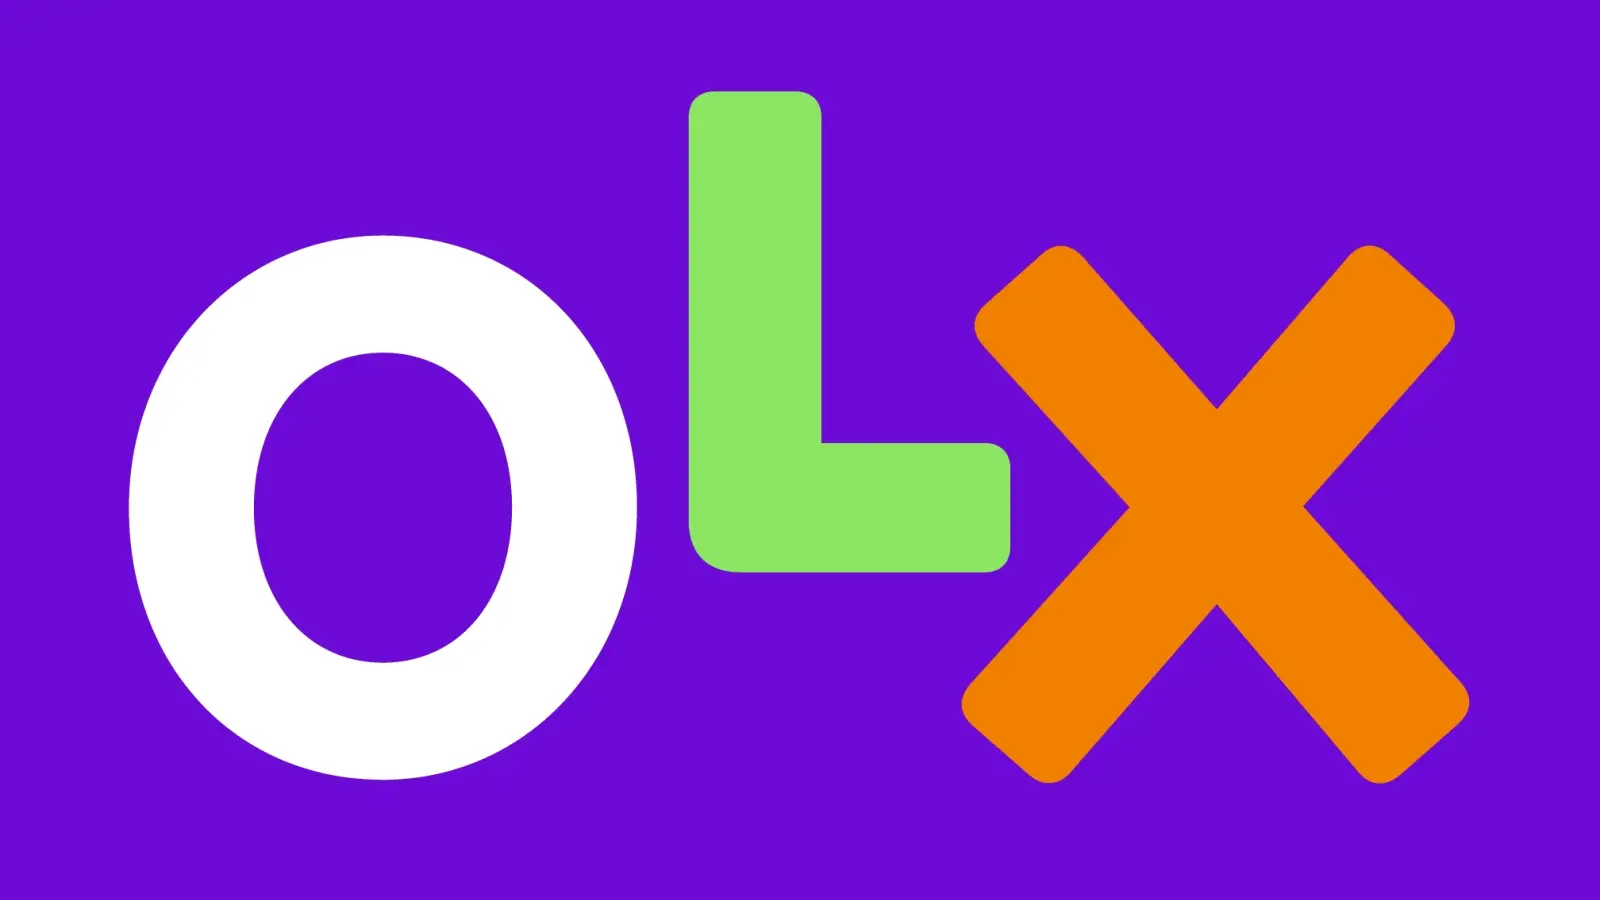 OLX says that Romanians are buying more and more luxury second-hand clothes